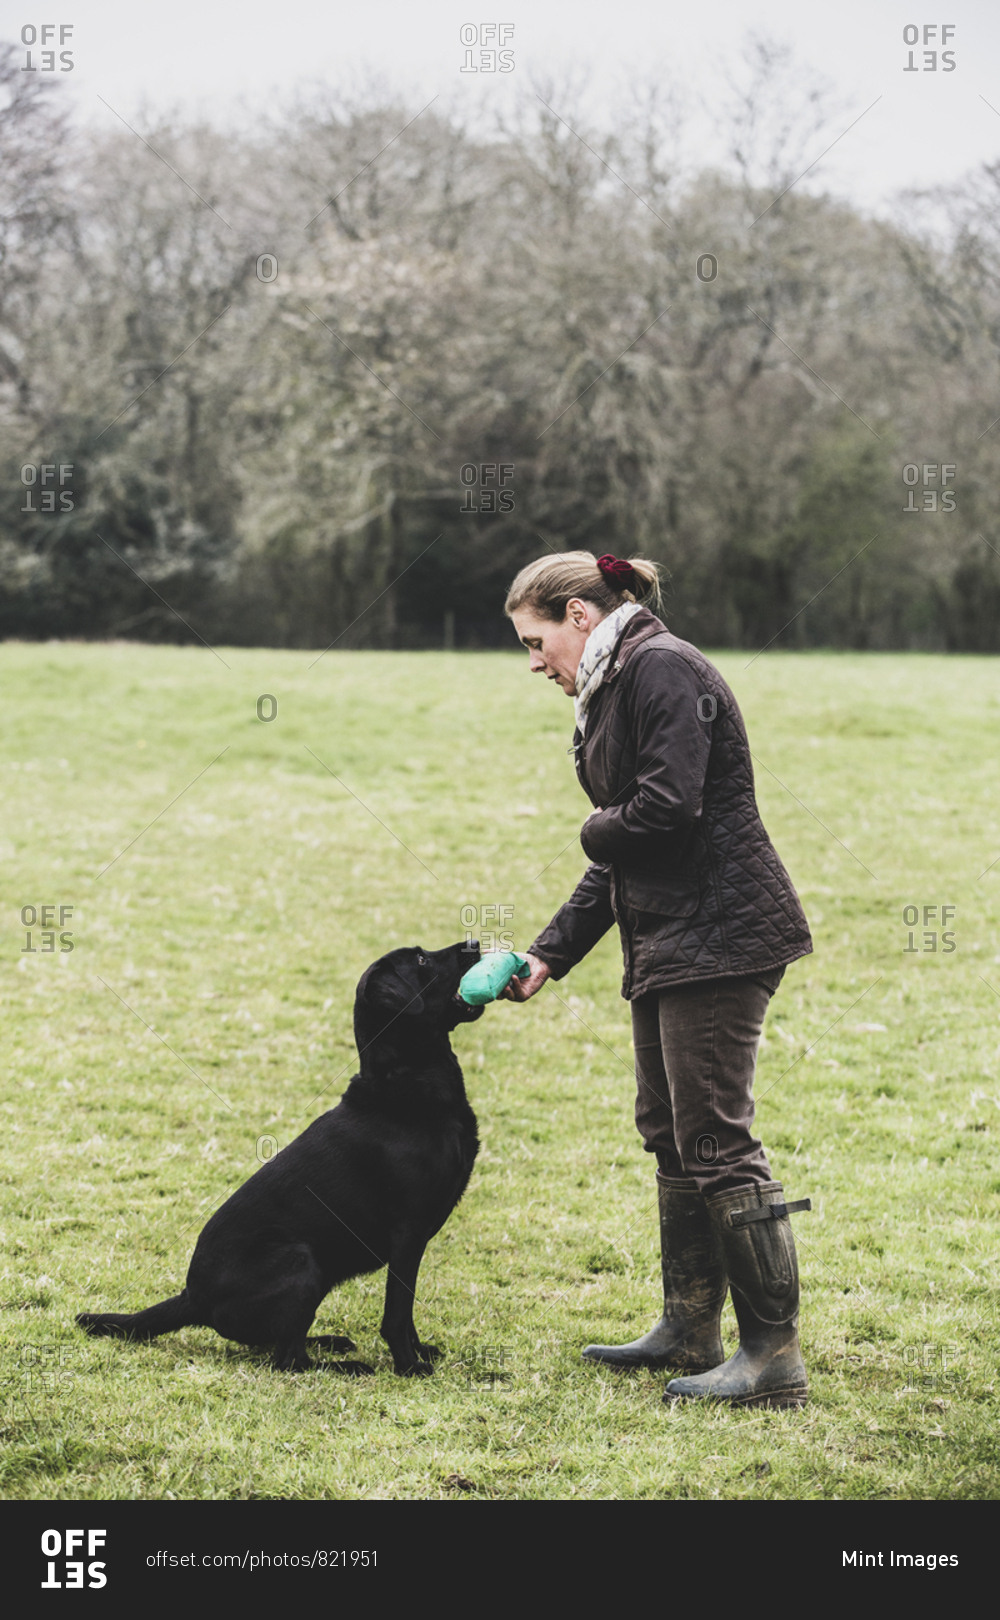 Woman standing outdoors in a field giving a green toy to Black Labrador dog.